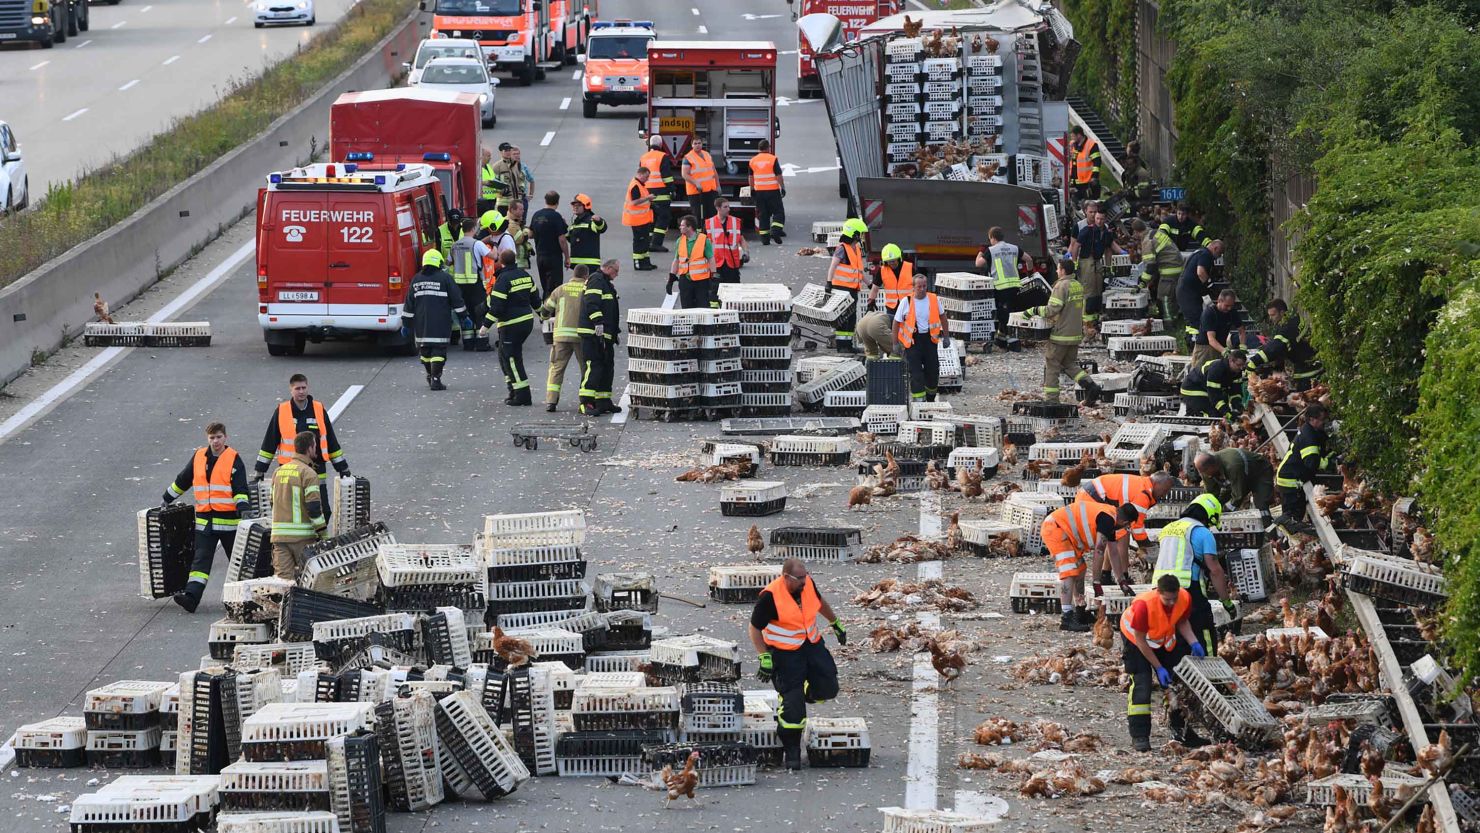 Firemen remove chicken and transport boxes from a highway near Linz, Austria on Tuesday.